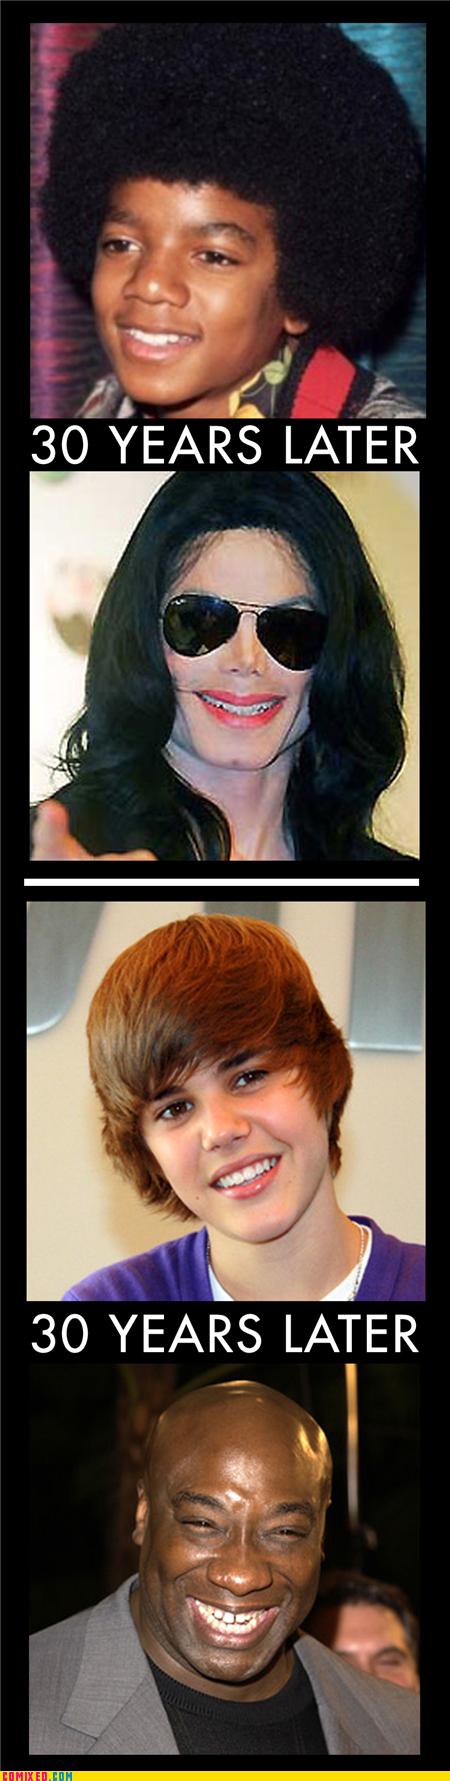 Justin featuring MJ featuring NAON